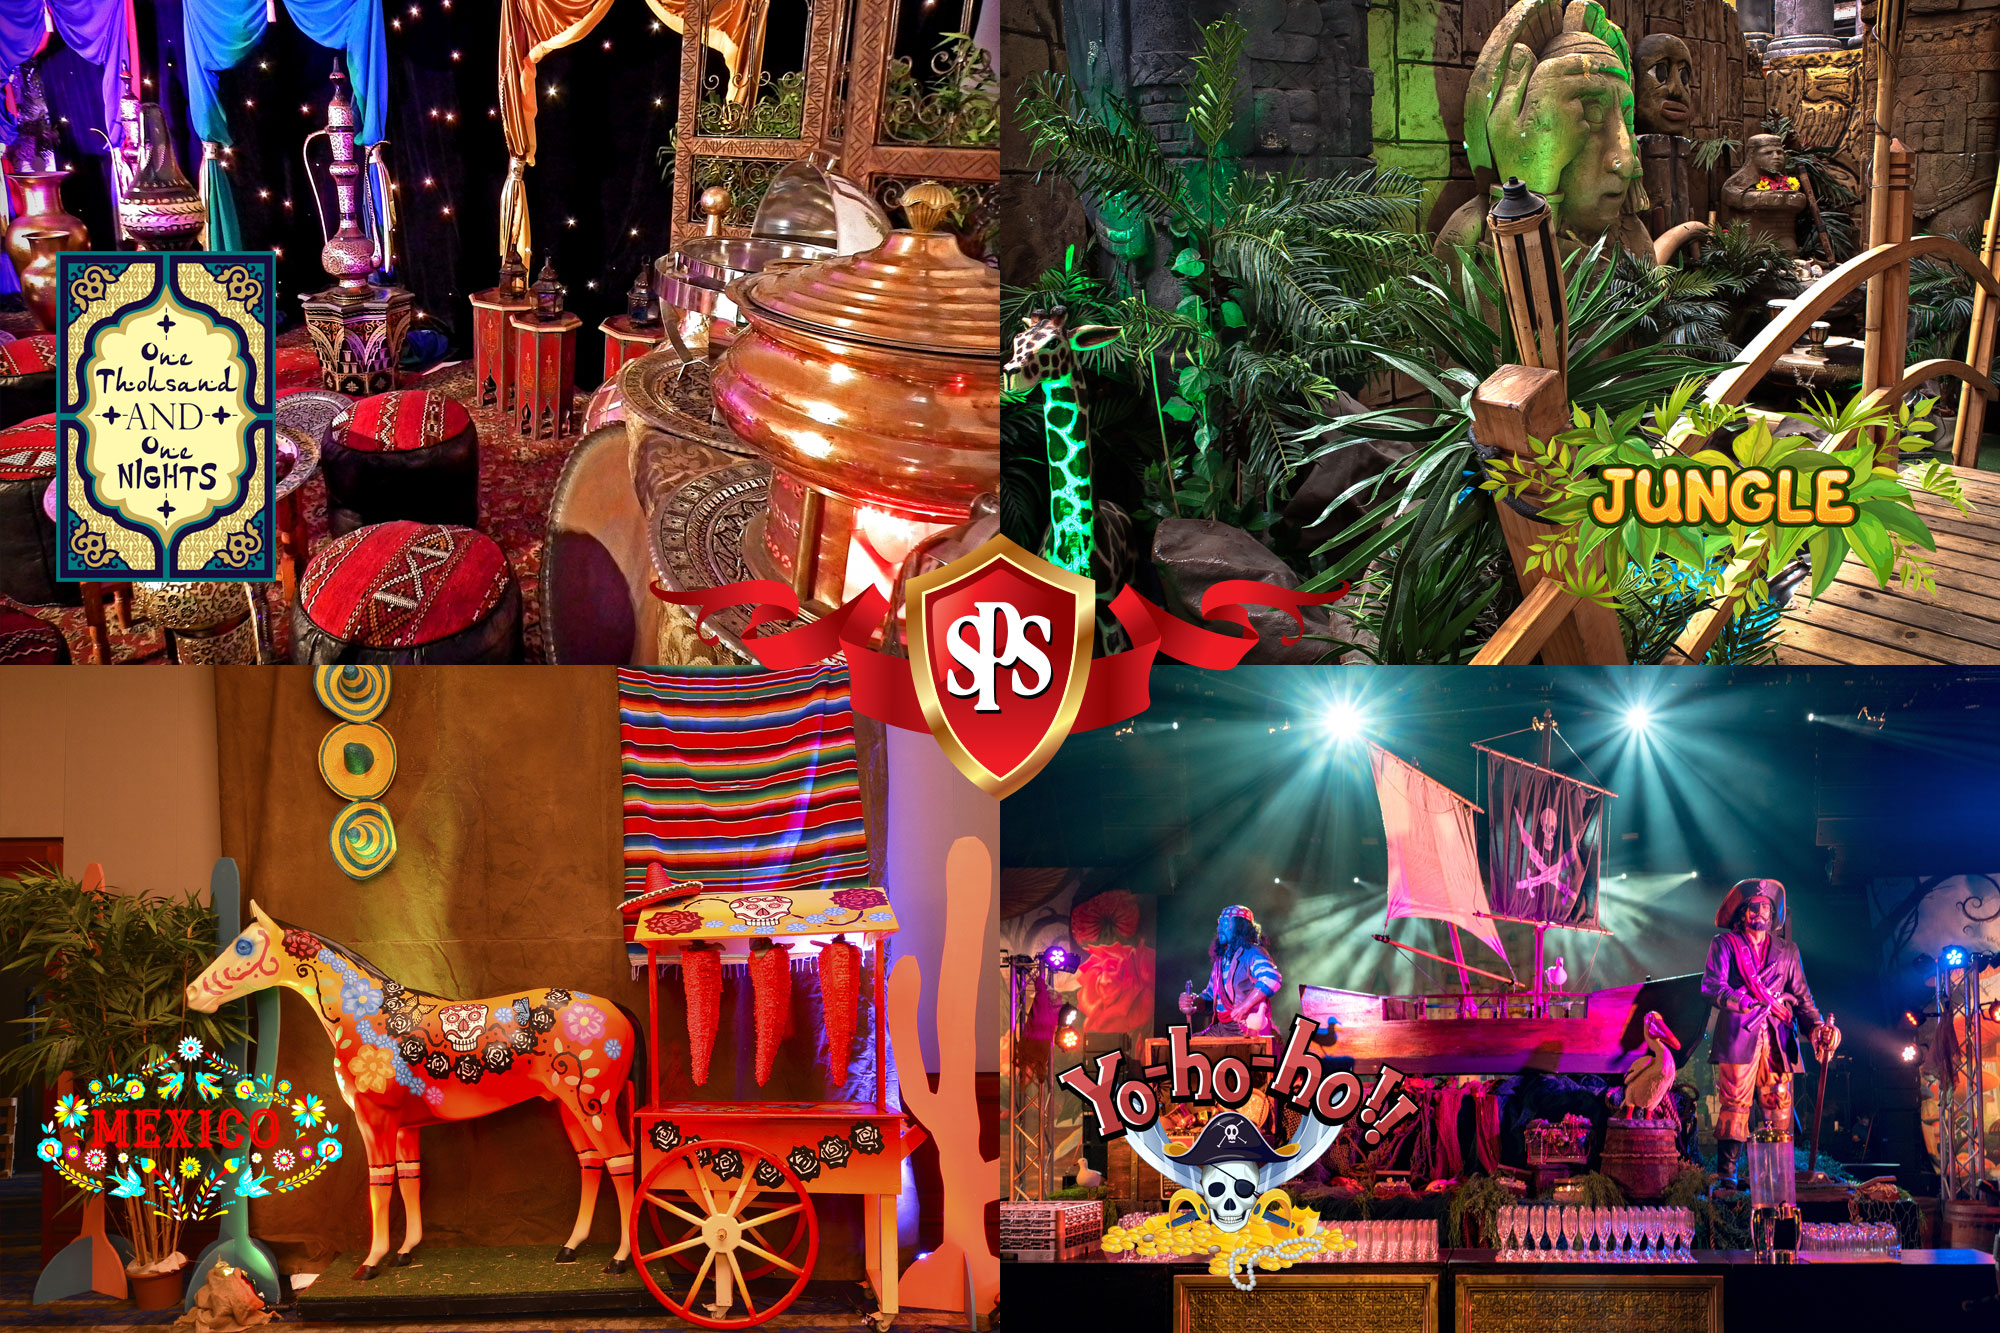 Four Great Themes from Sydney Props - Arabian, Jungle, Mexican, Pirate